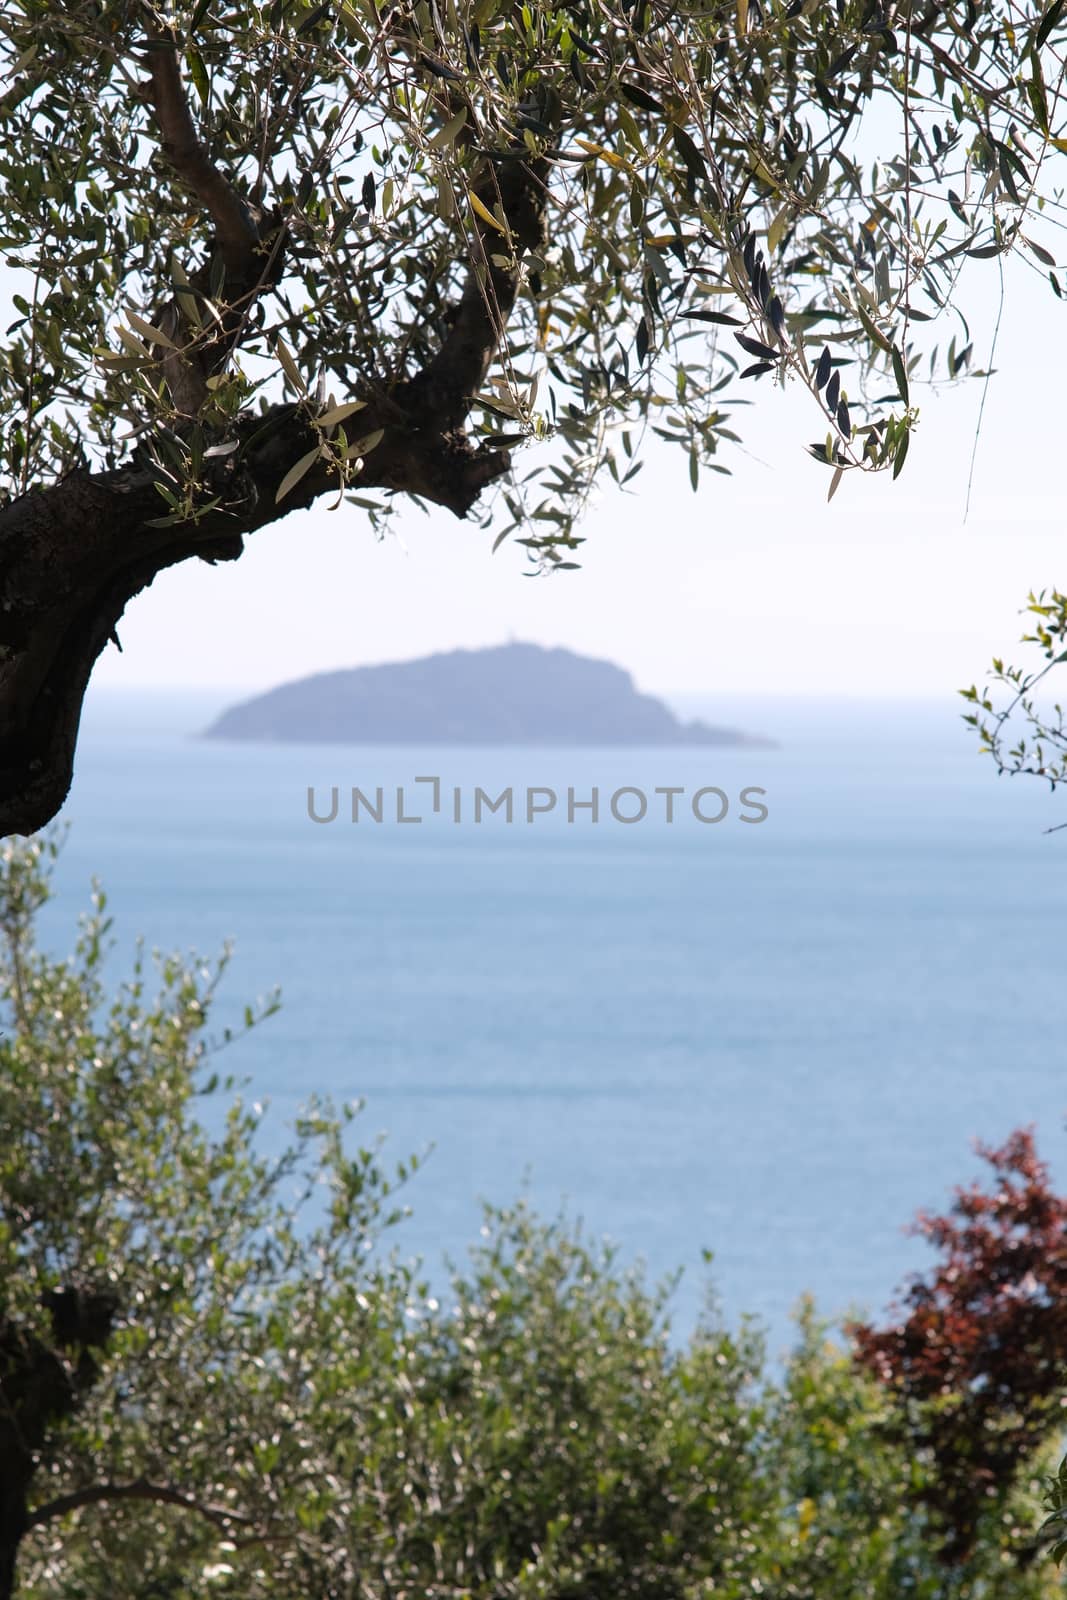 Olive grove on the Ligurian coast. In the gulf of La Spezia, near the Cinque Terre, a garden with olive trees. In the background the island of Tino.